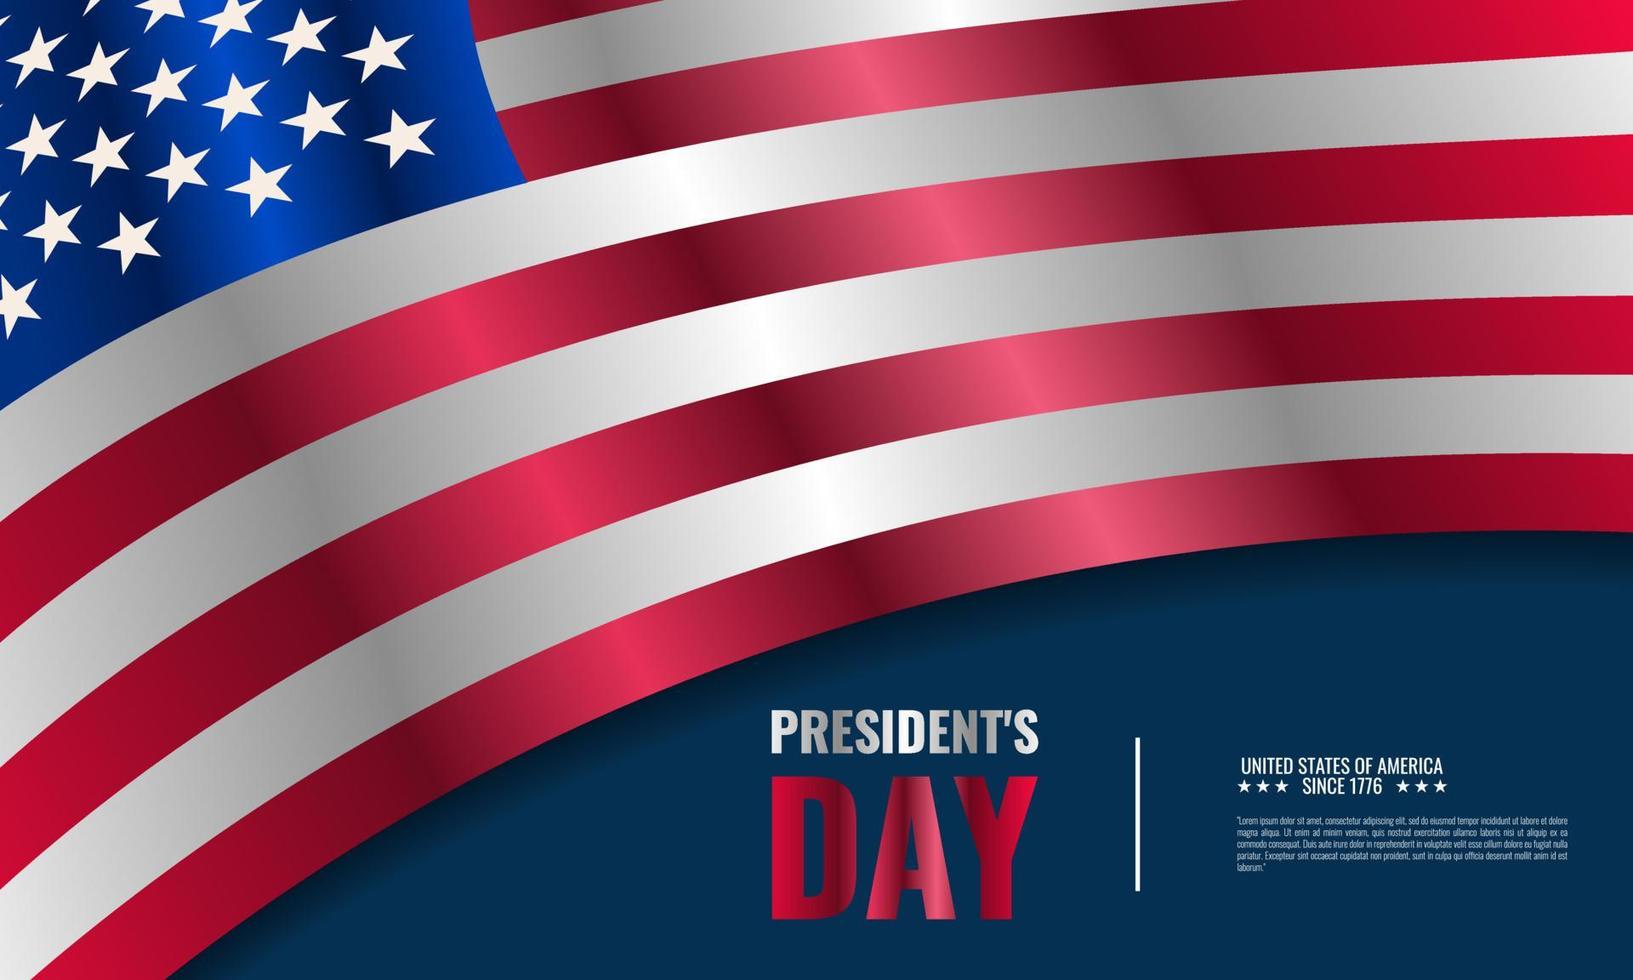 President day background sales promotion advertising banner template with american flag design vector